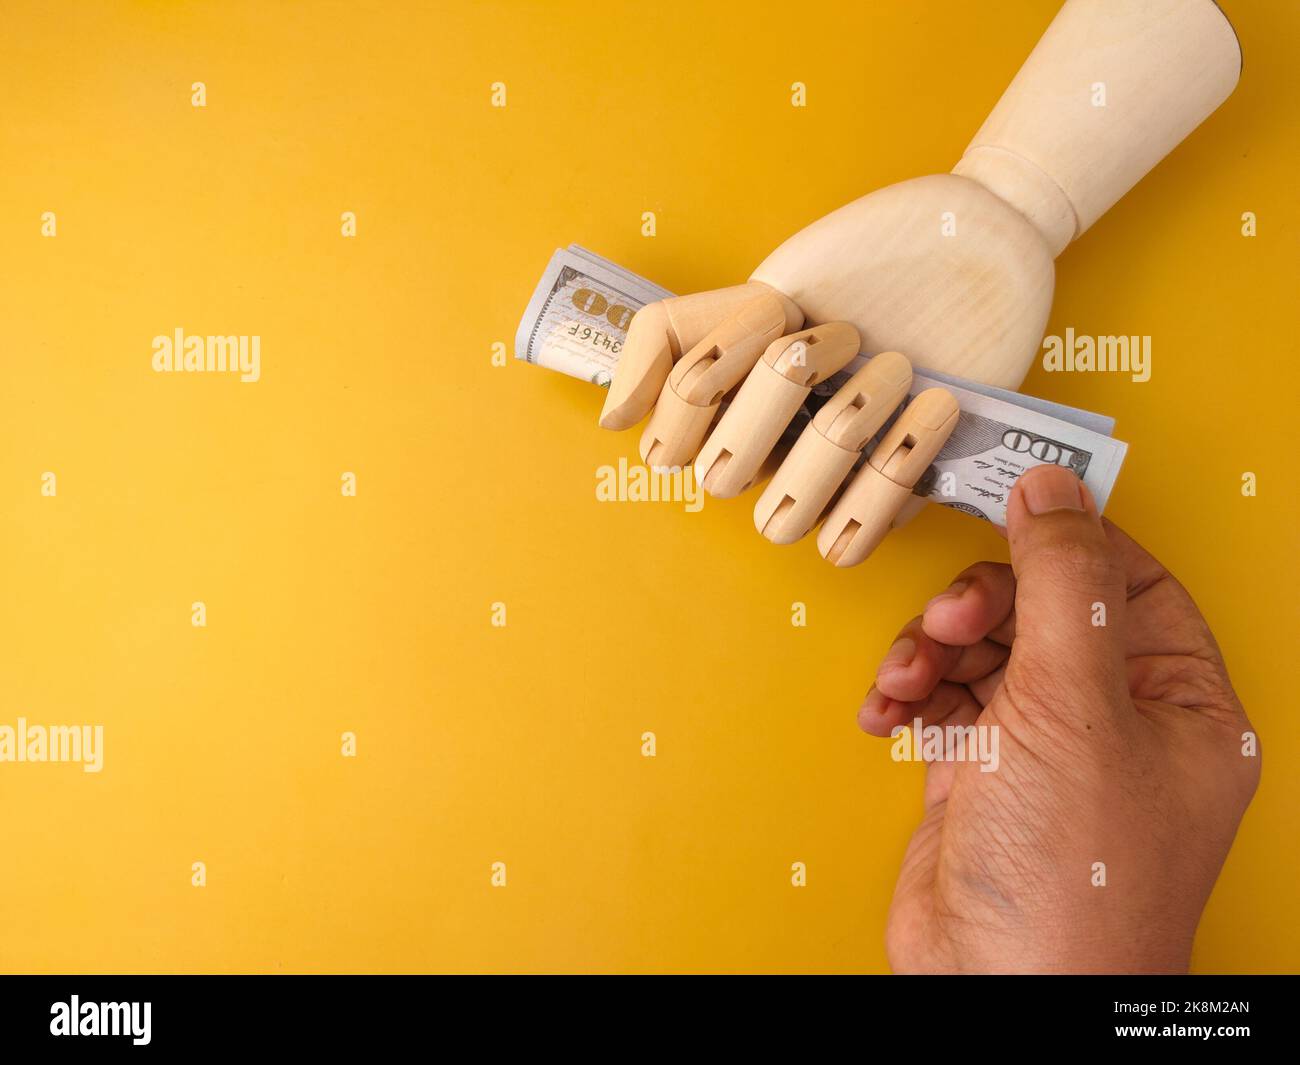 A top view of an adult hand pulling money from a wooden hand grip on a yellow background with copy space Stock Photo